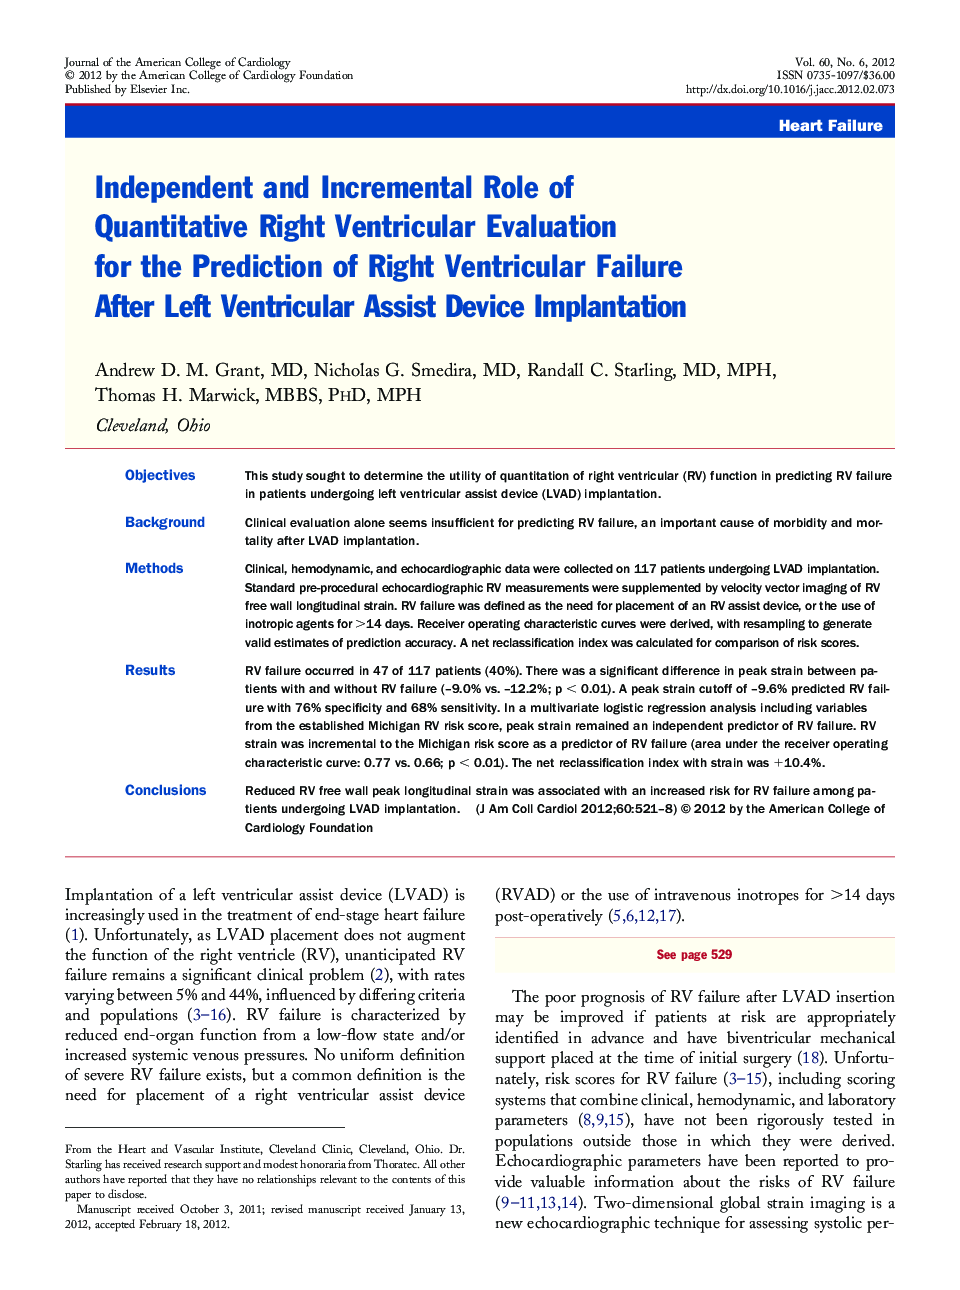 Independent and Incremental Role of Quantitative Right Ventricular Evaluation for the Prediction of Right Ventricular Failure After Left Ventricular Assist Device Implantation 